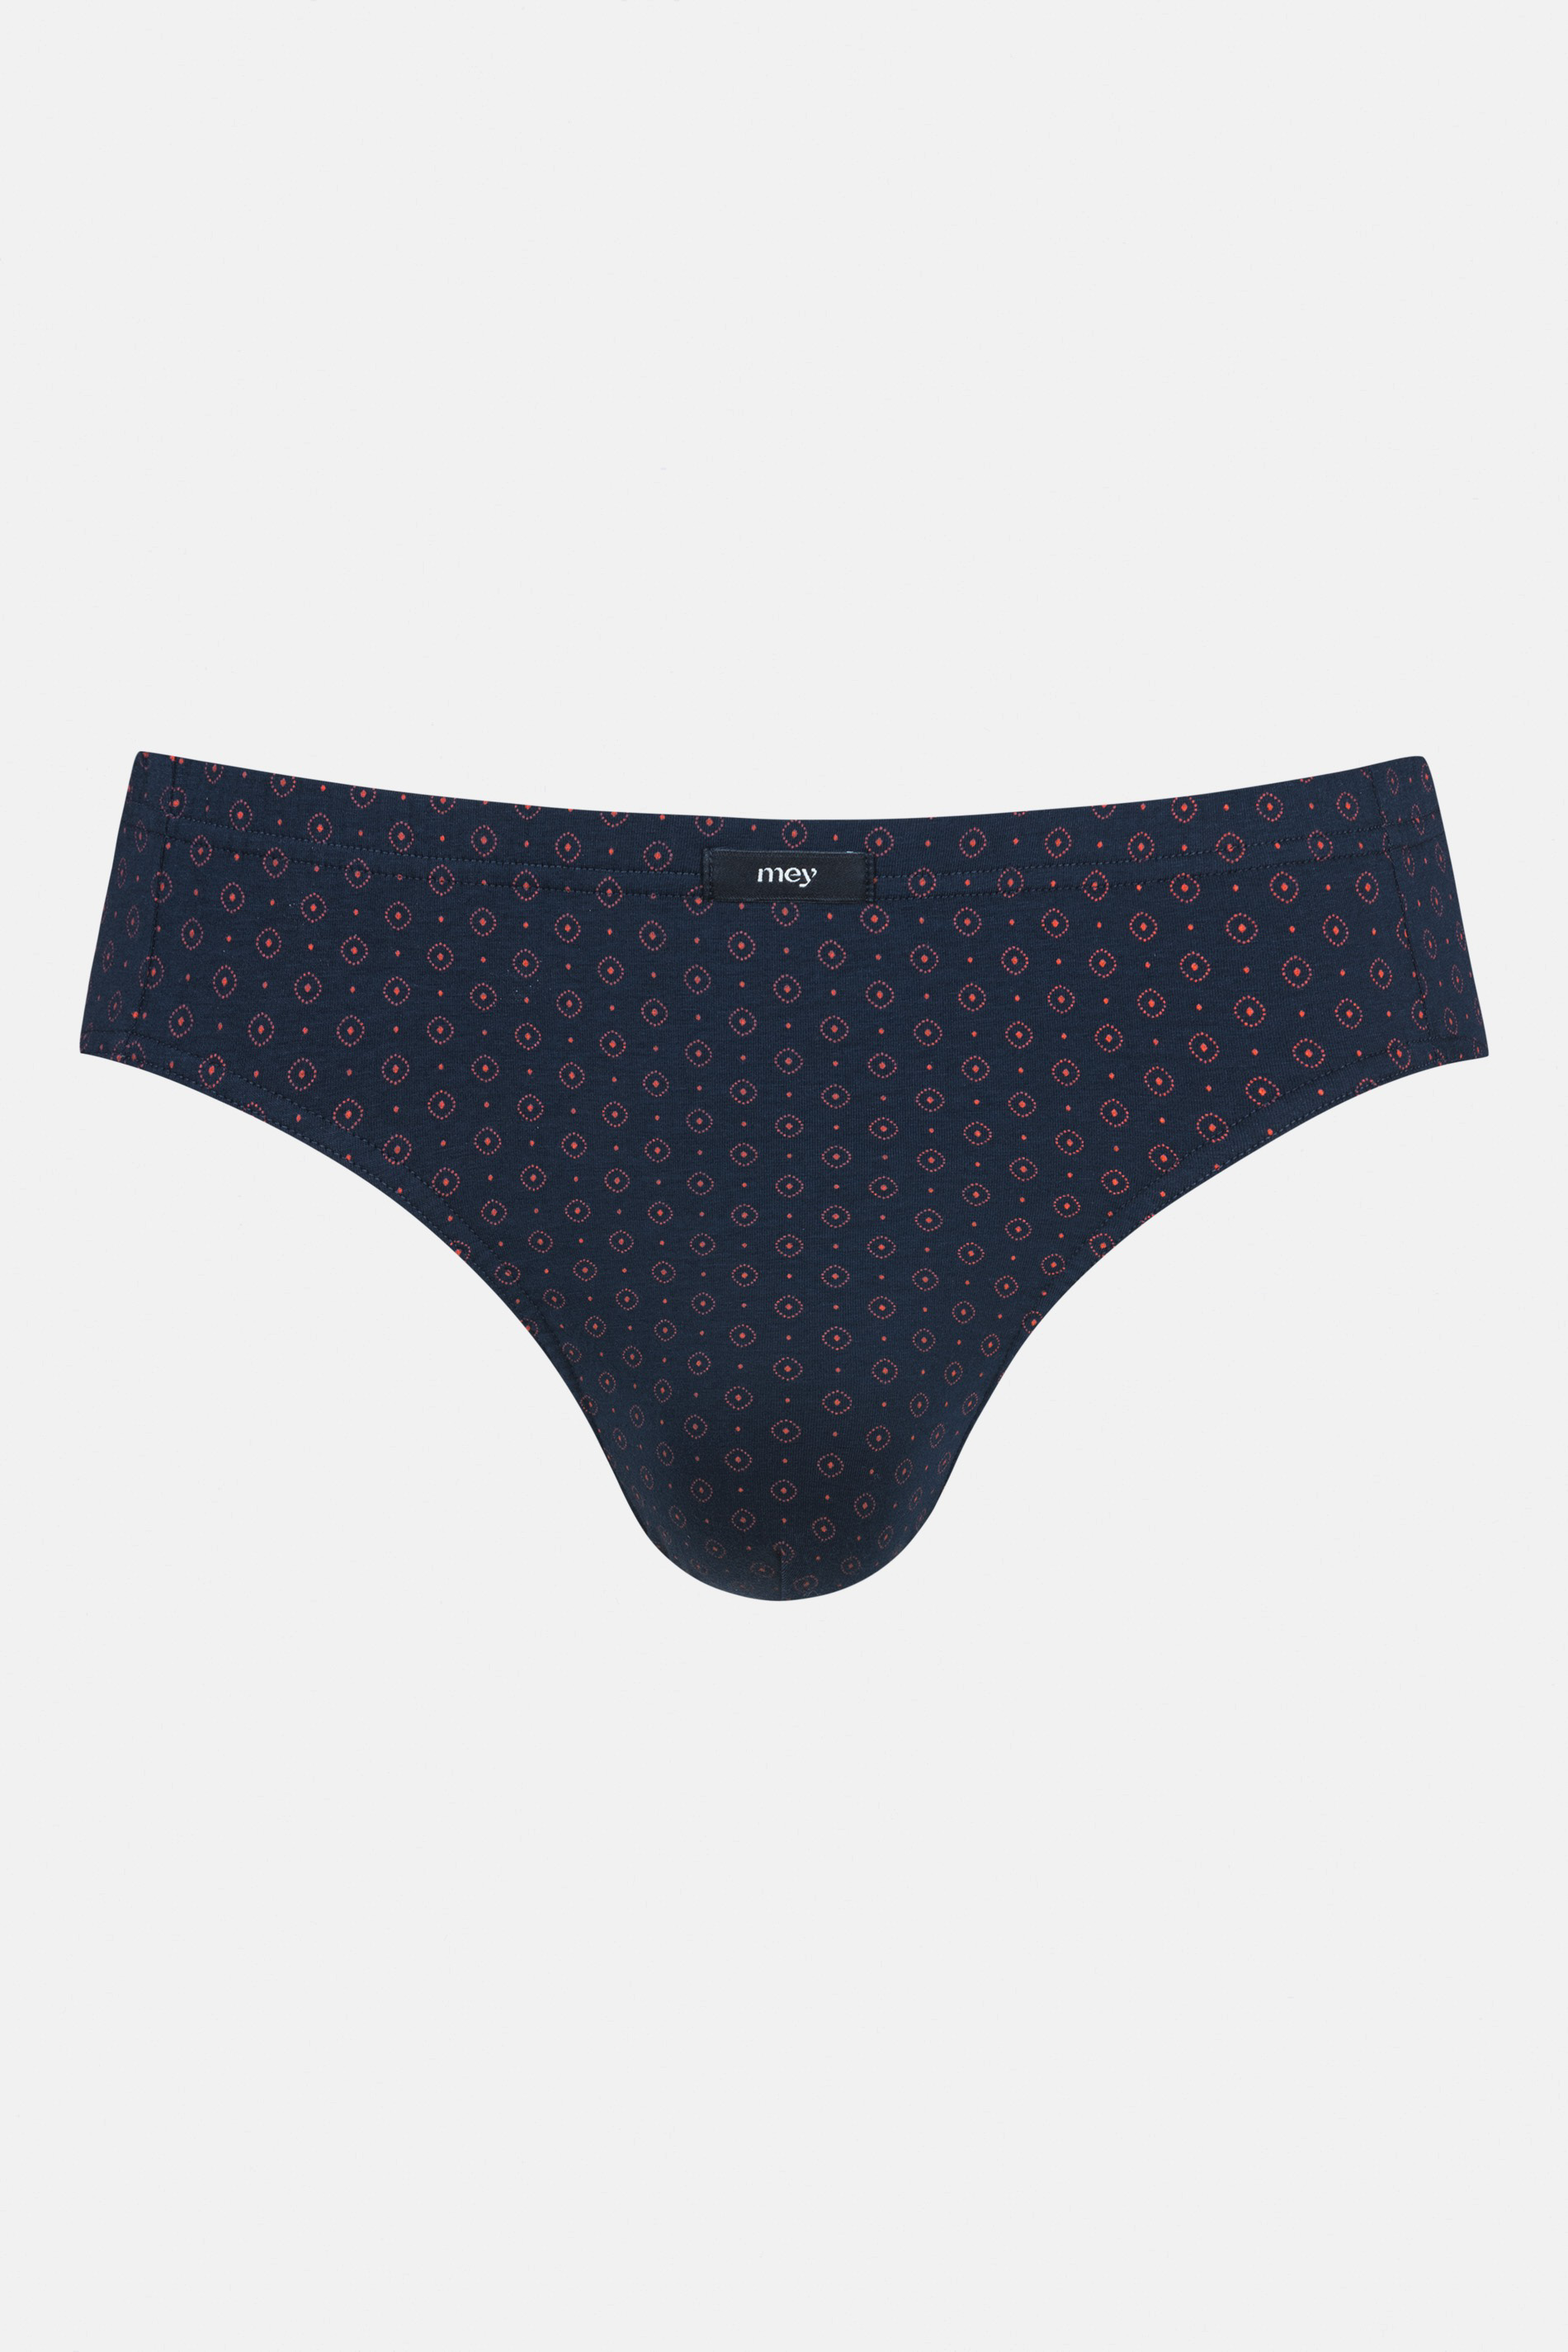 Jazz briefs Serie Pointed Cut Out | mey®